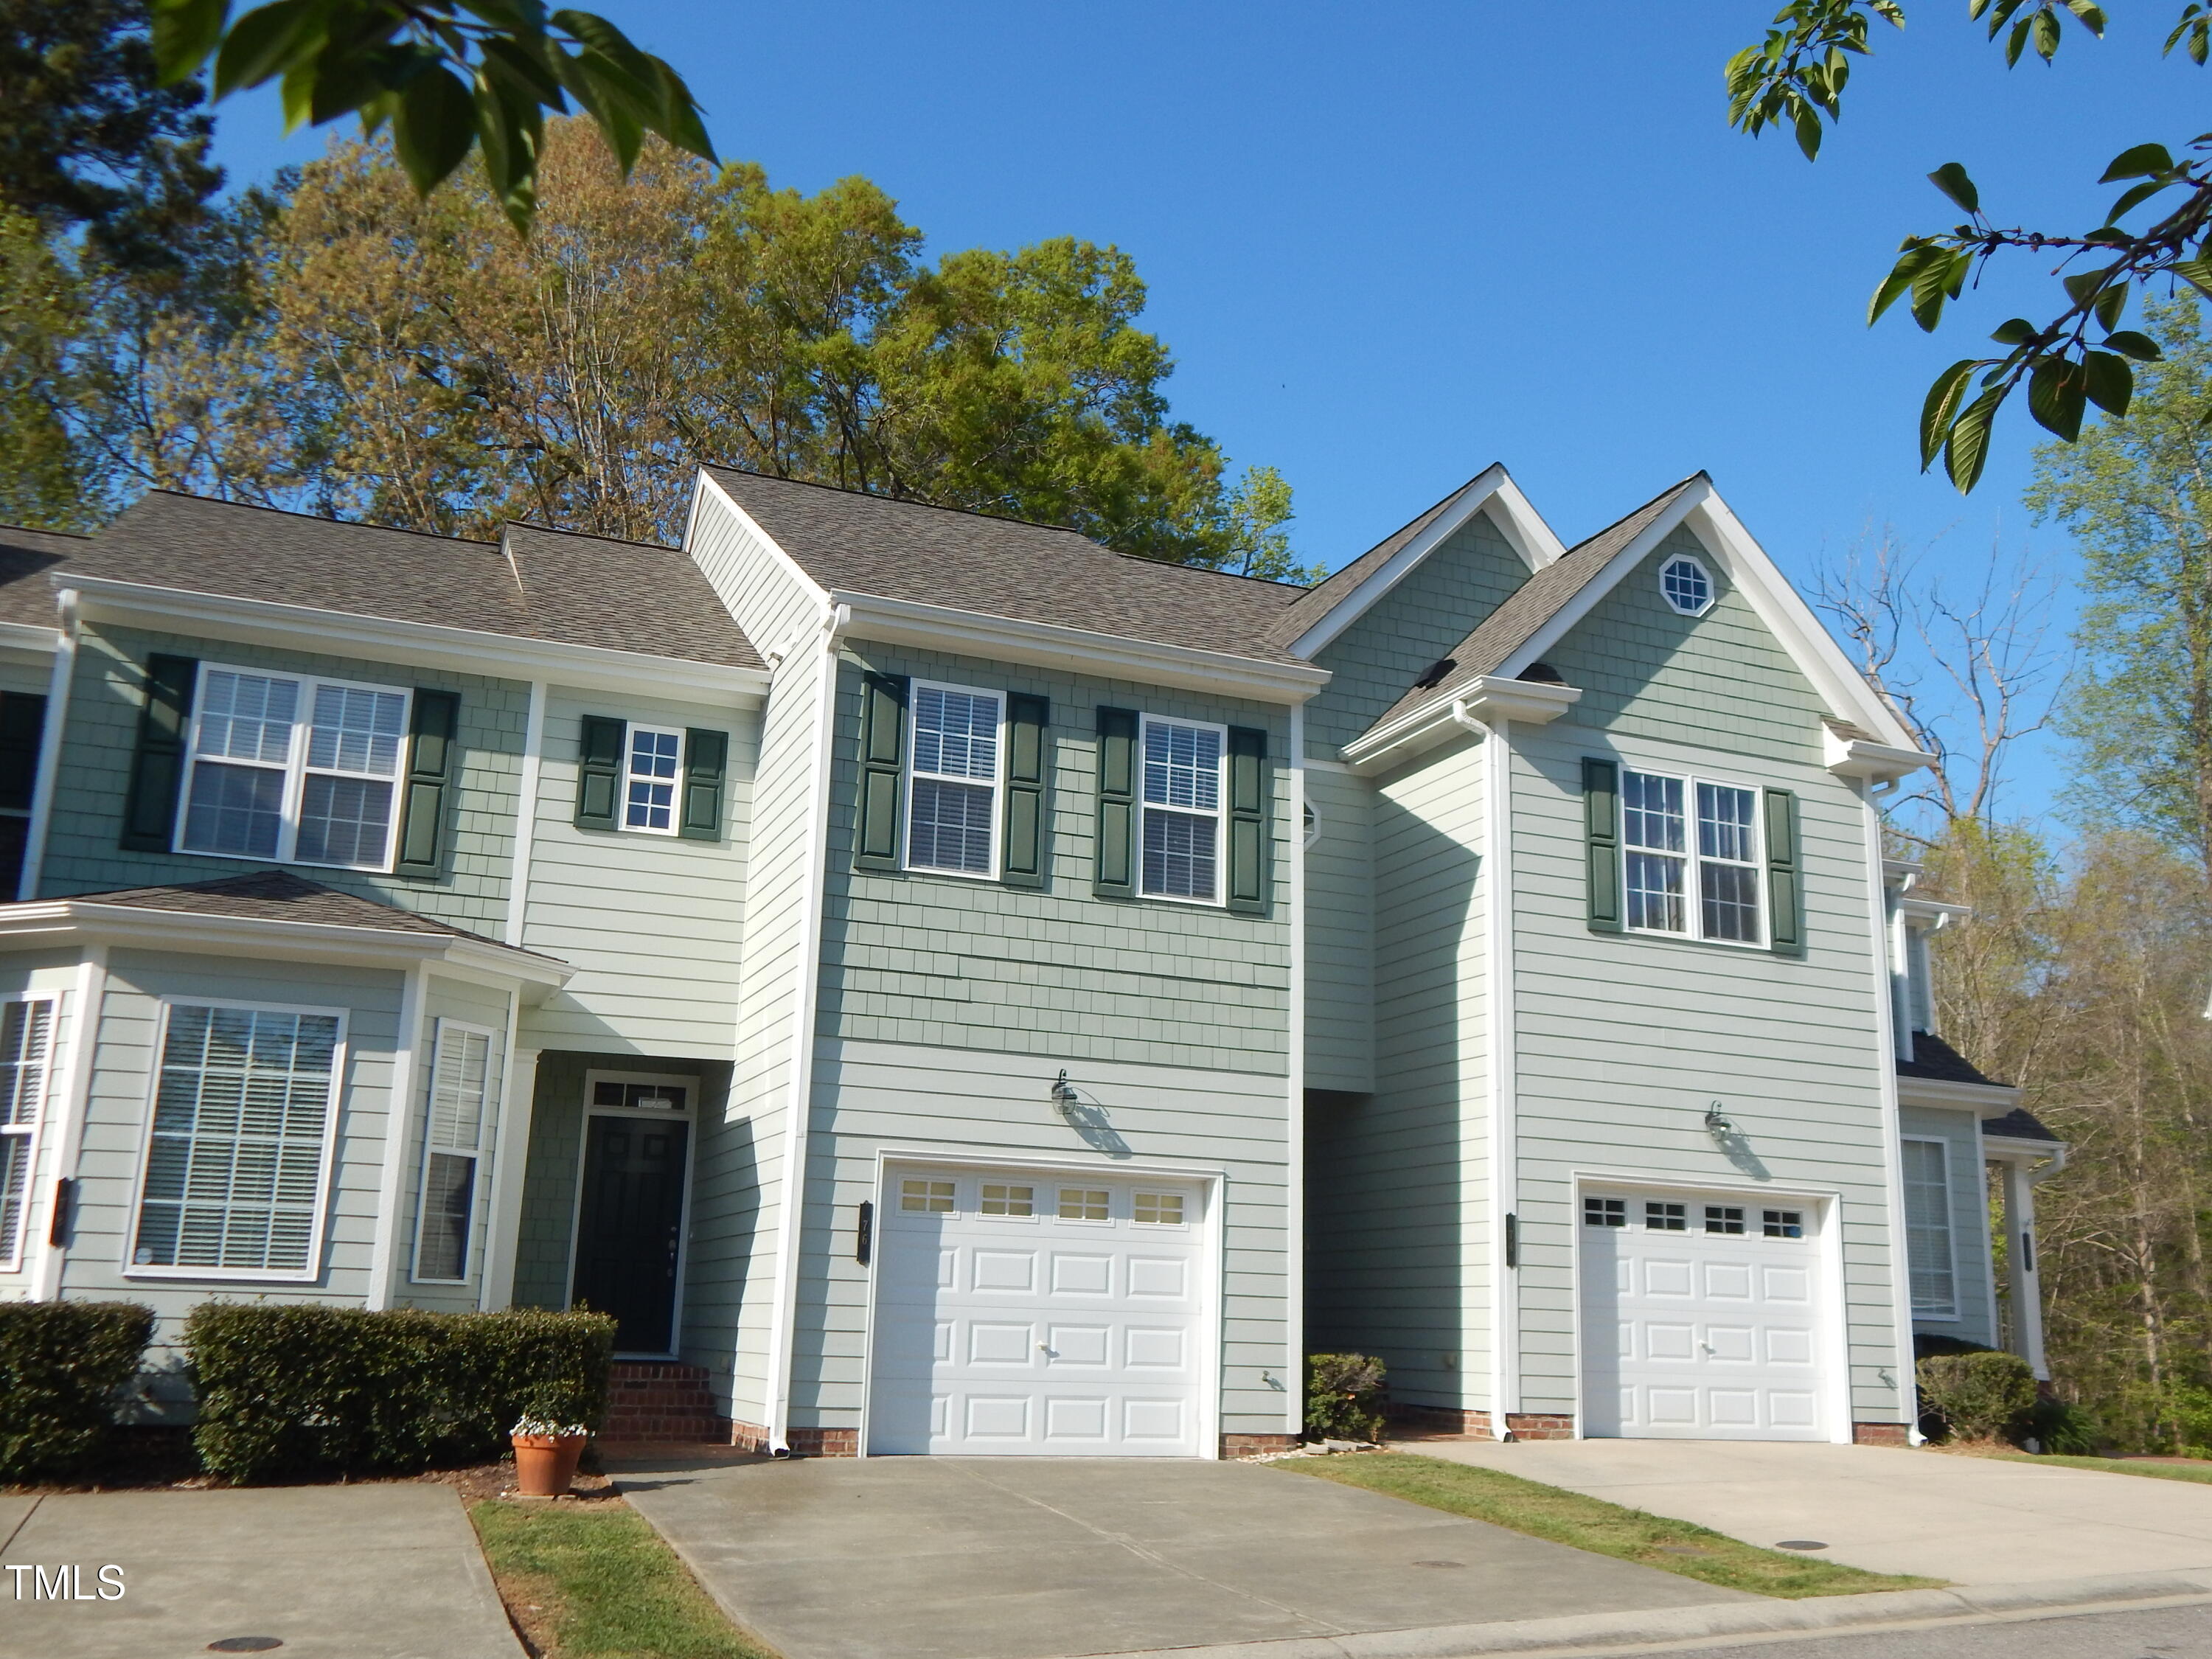 View Durham, NC 27707 townhome